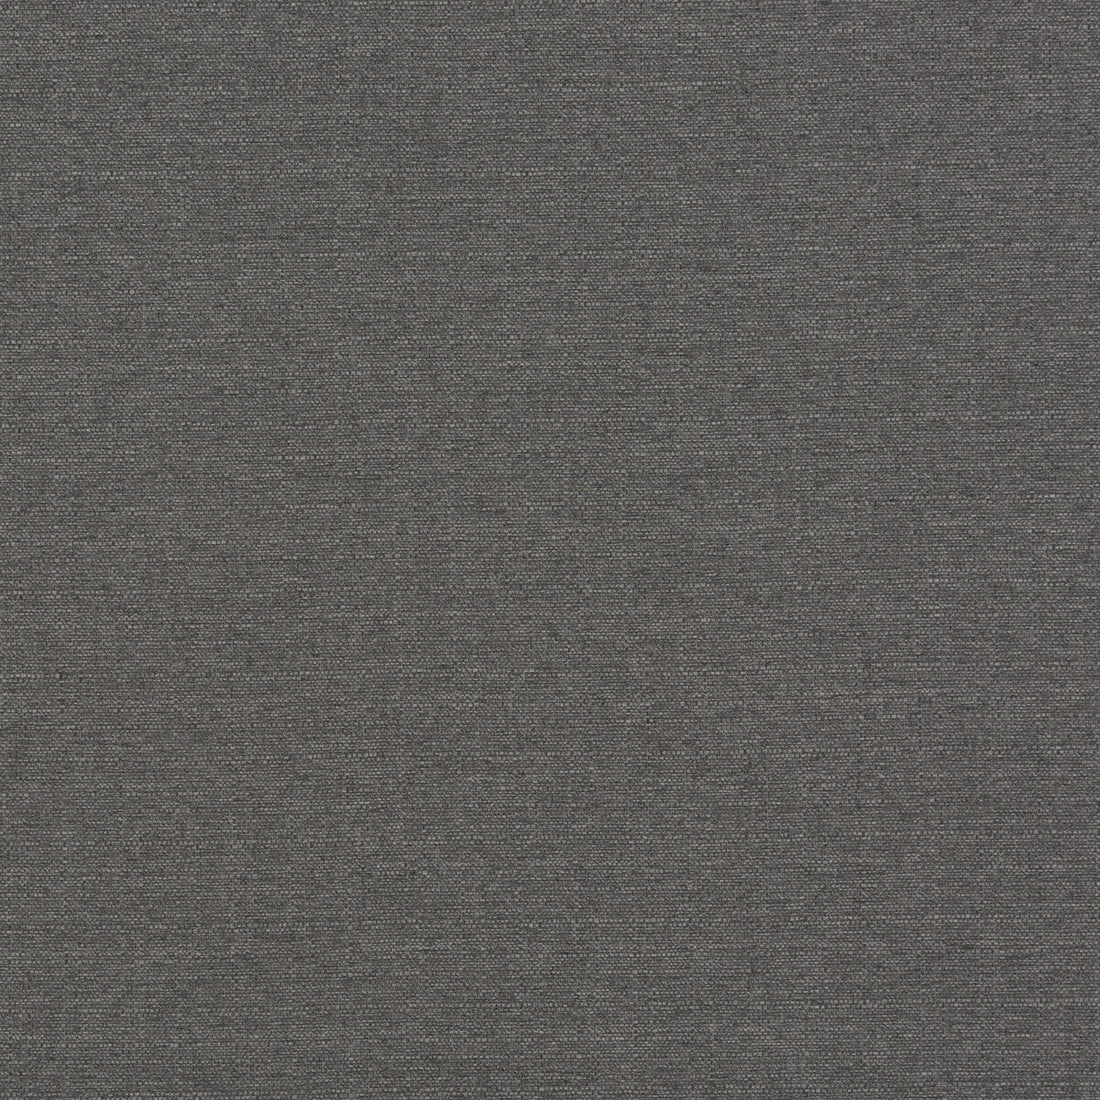 Lansdowne fabric in graphite color - pattern PF50413.970.0 - by Baker Lifestyle in the Notebooks collection